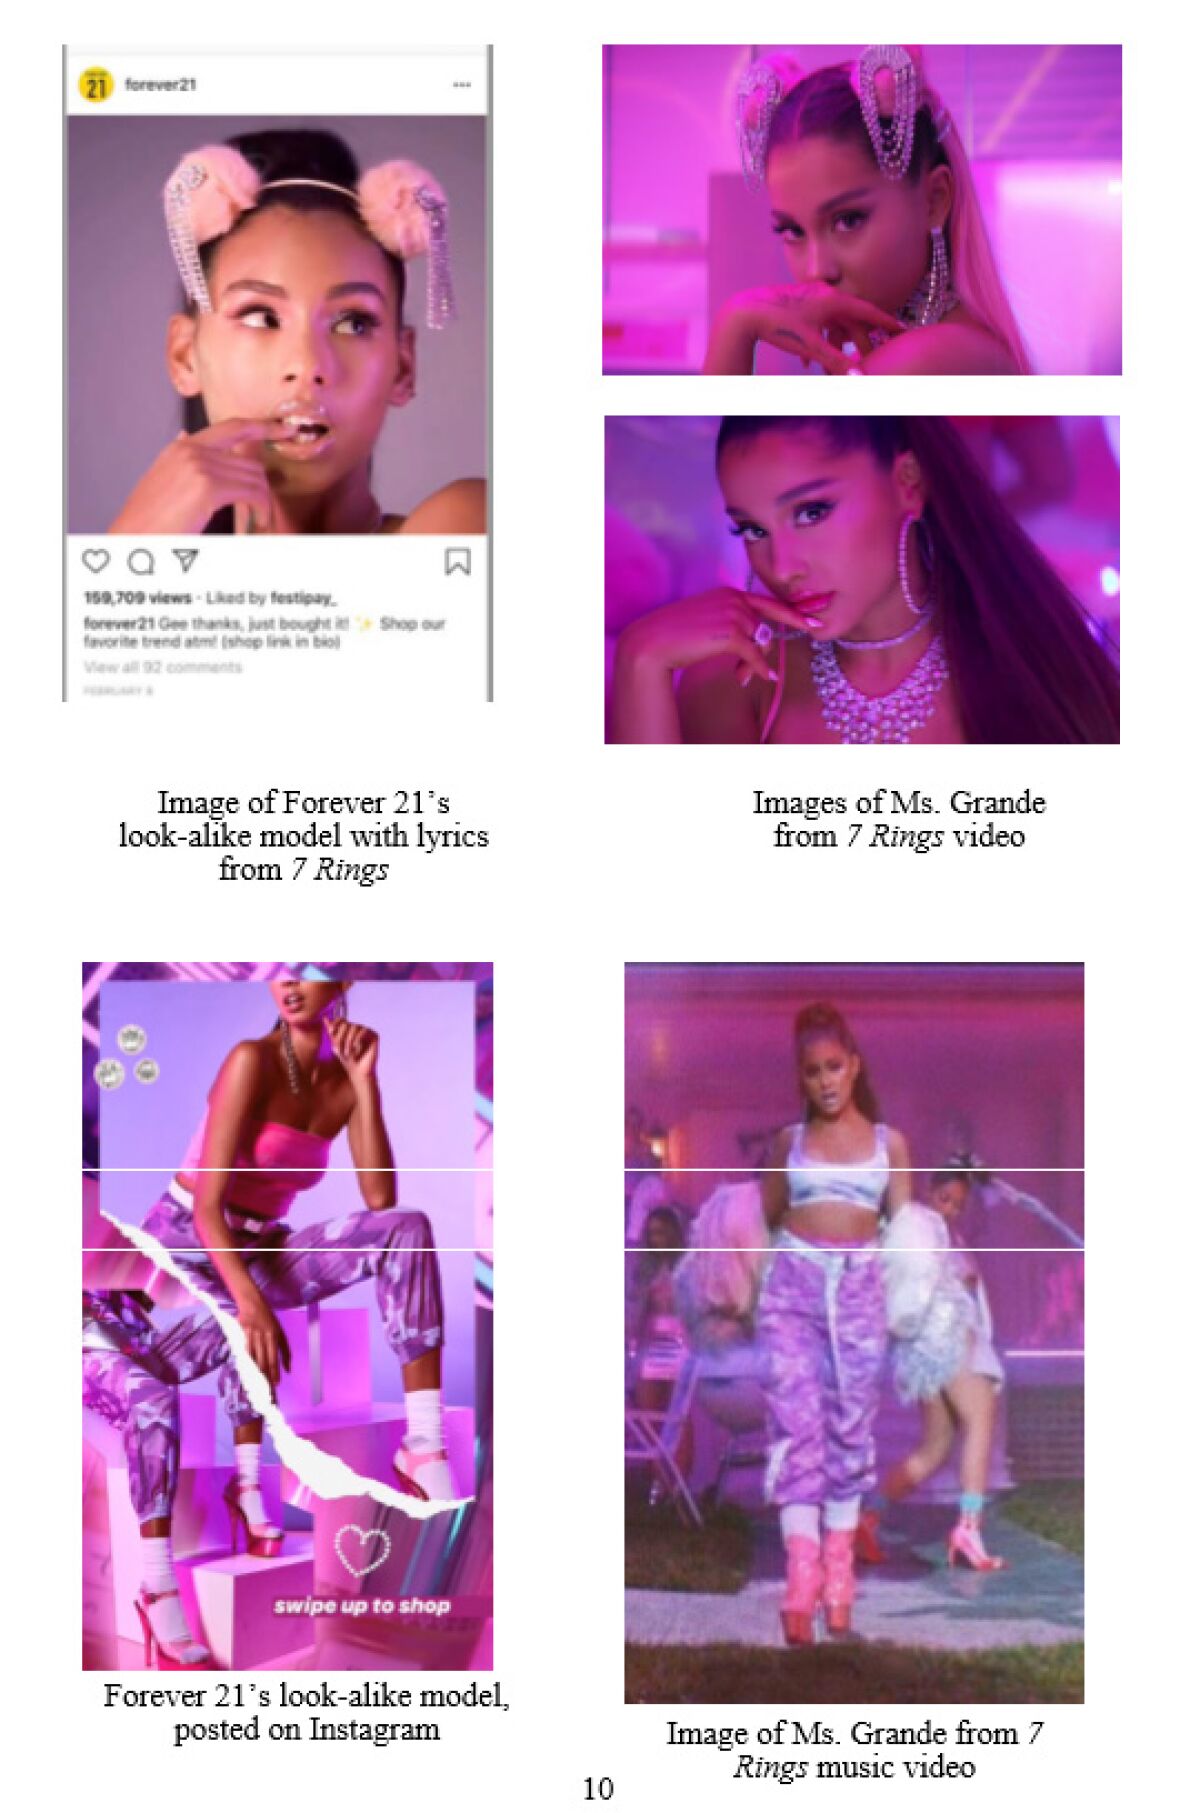 Examples of what the lawsuit says are unauthorized posts depicting singer Ariana Grande published by Forever 21 and Riley Rose.